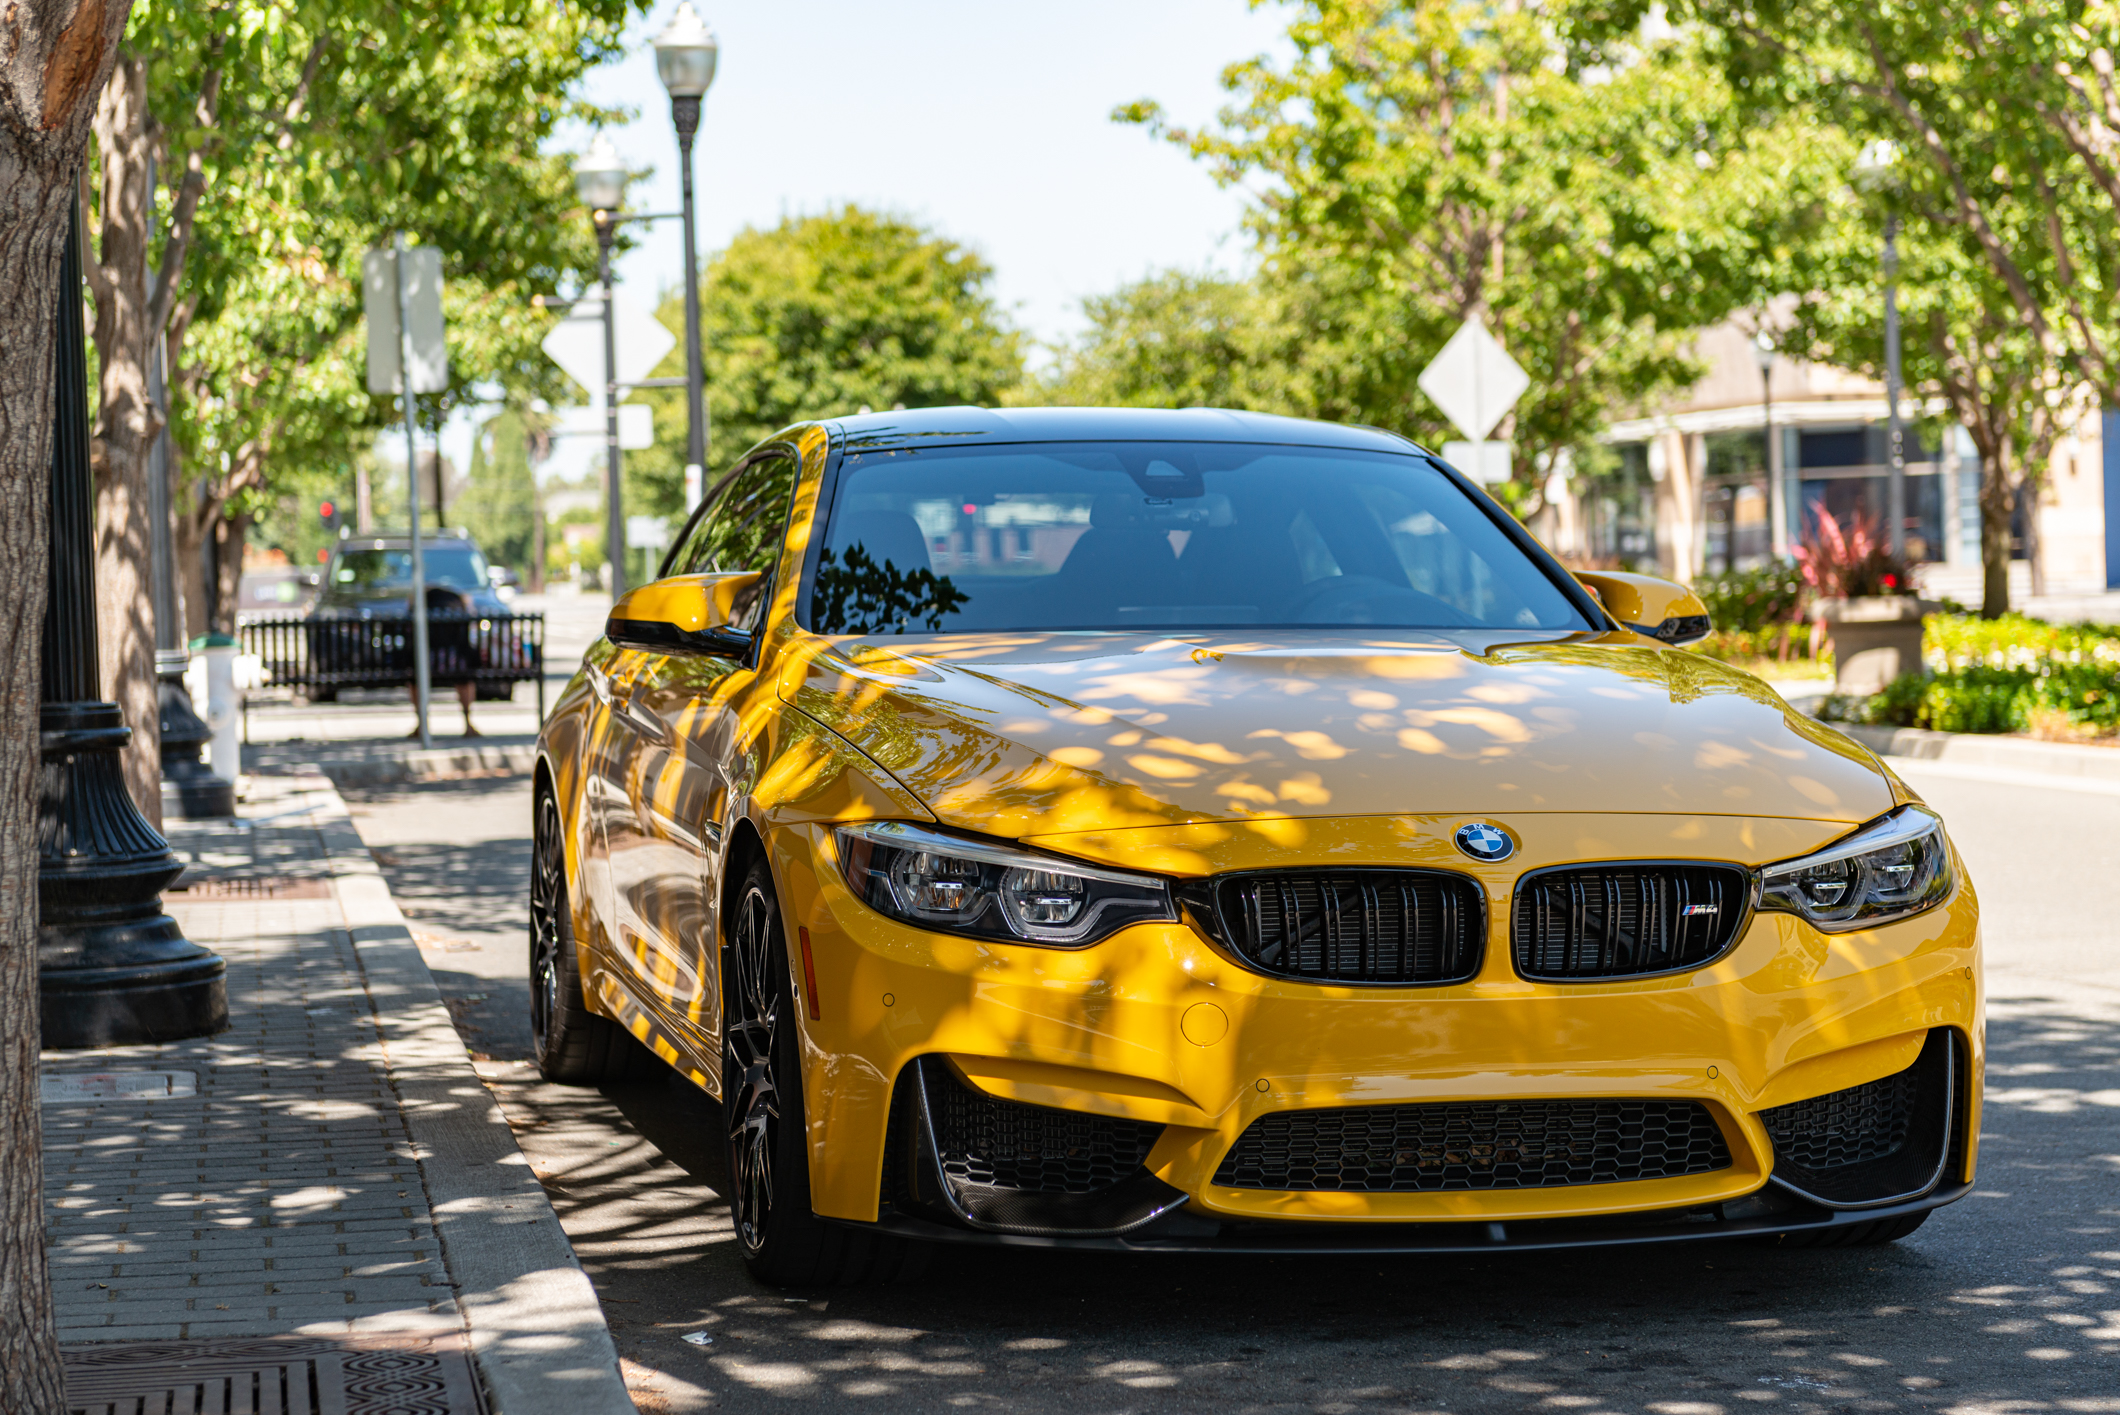 Photo of yellow BMW M4 in the shade